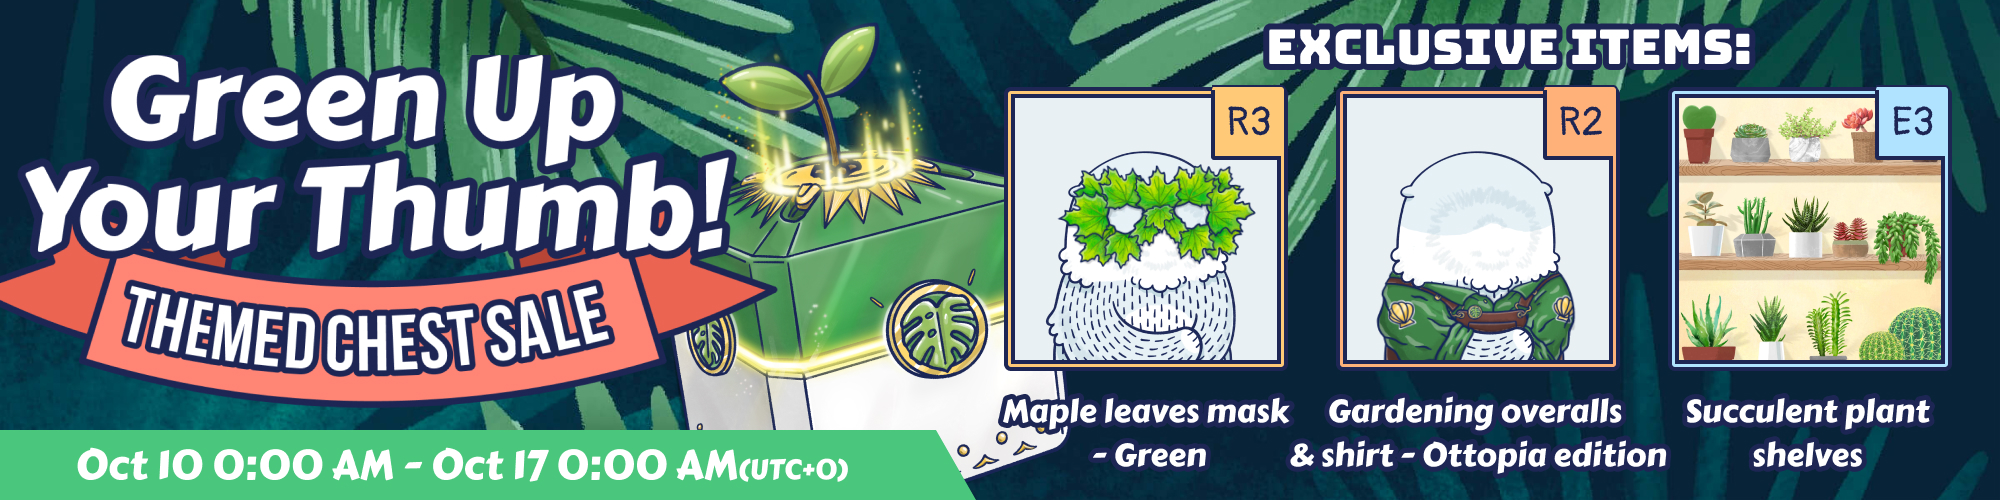 Green Thumb Chest Sale